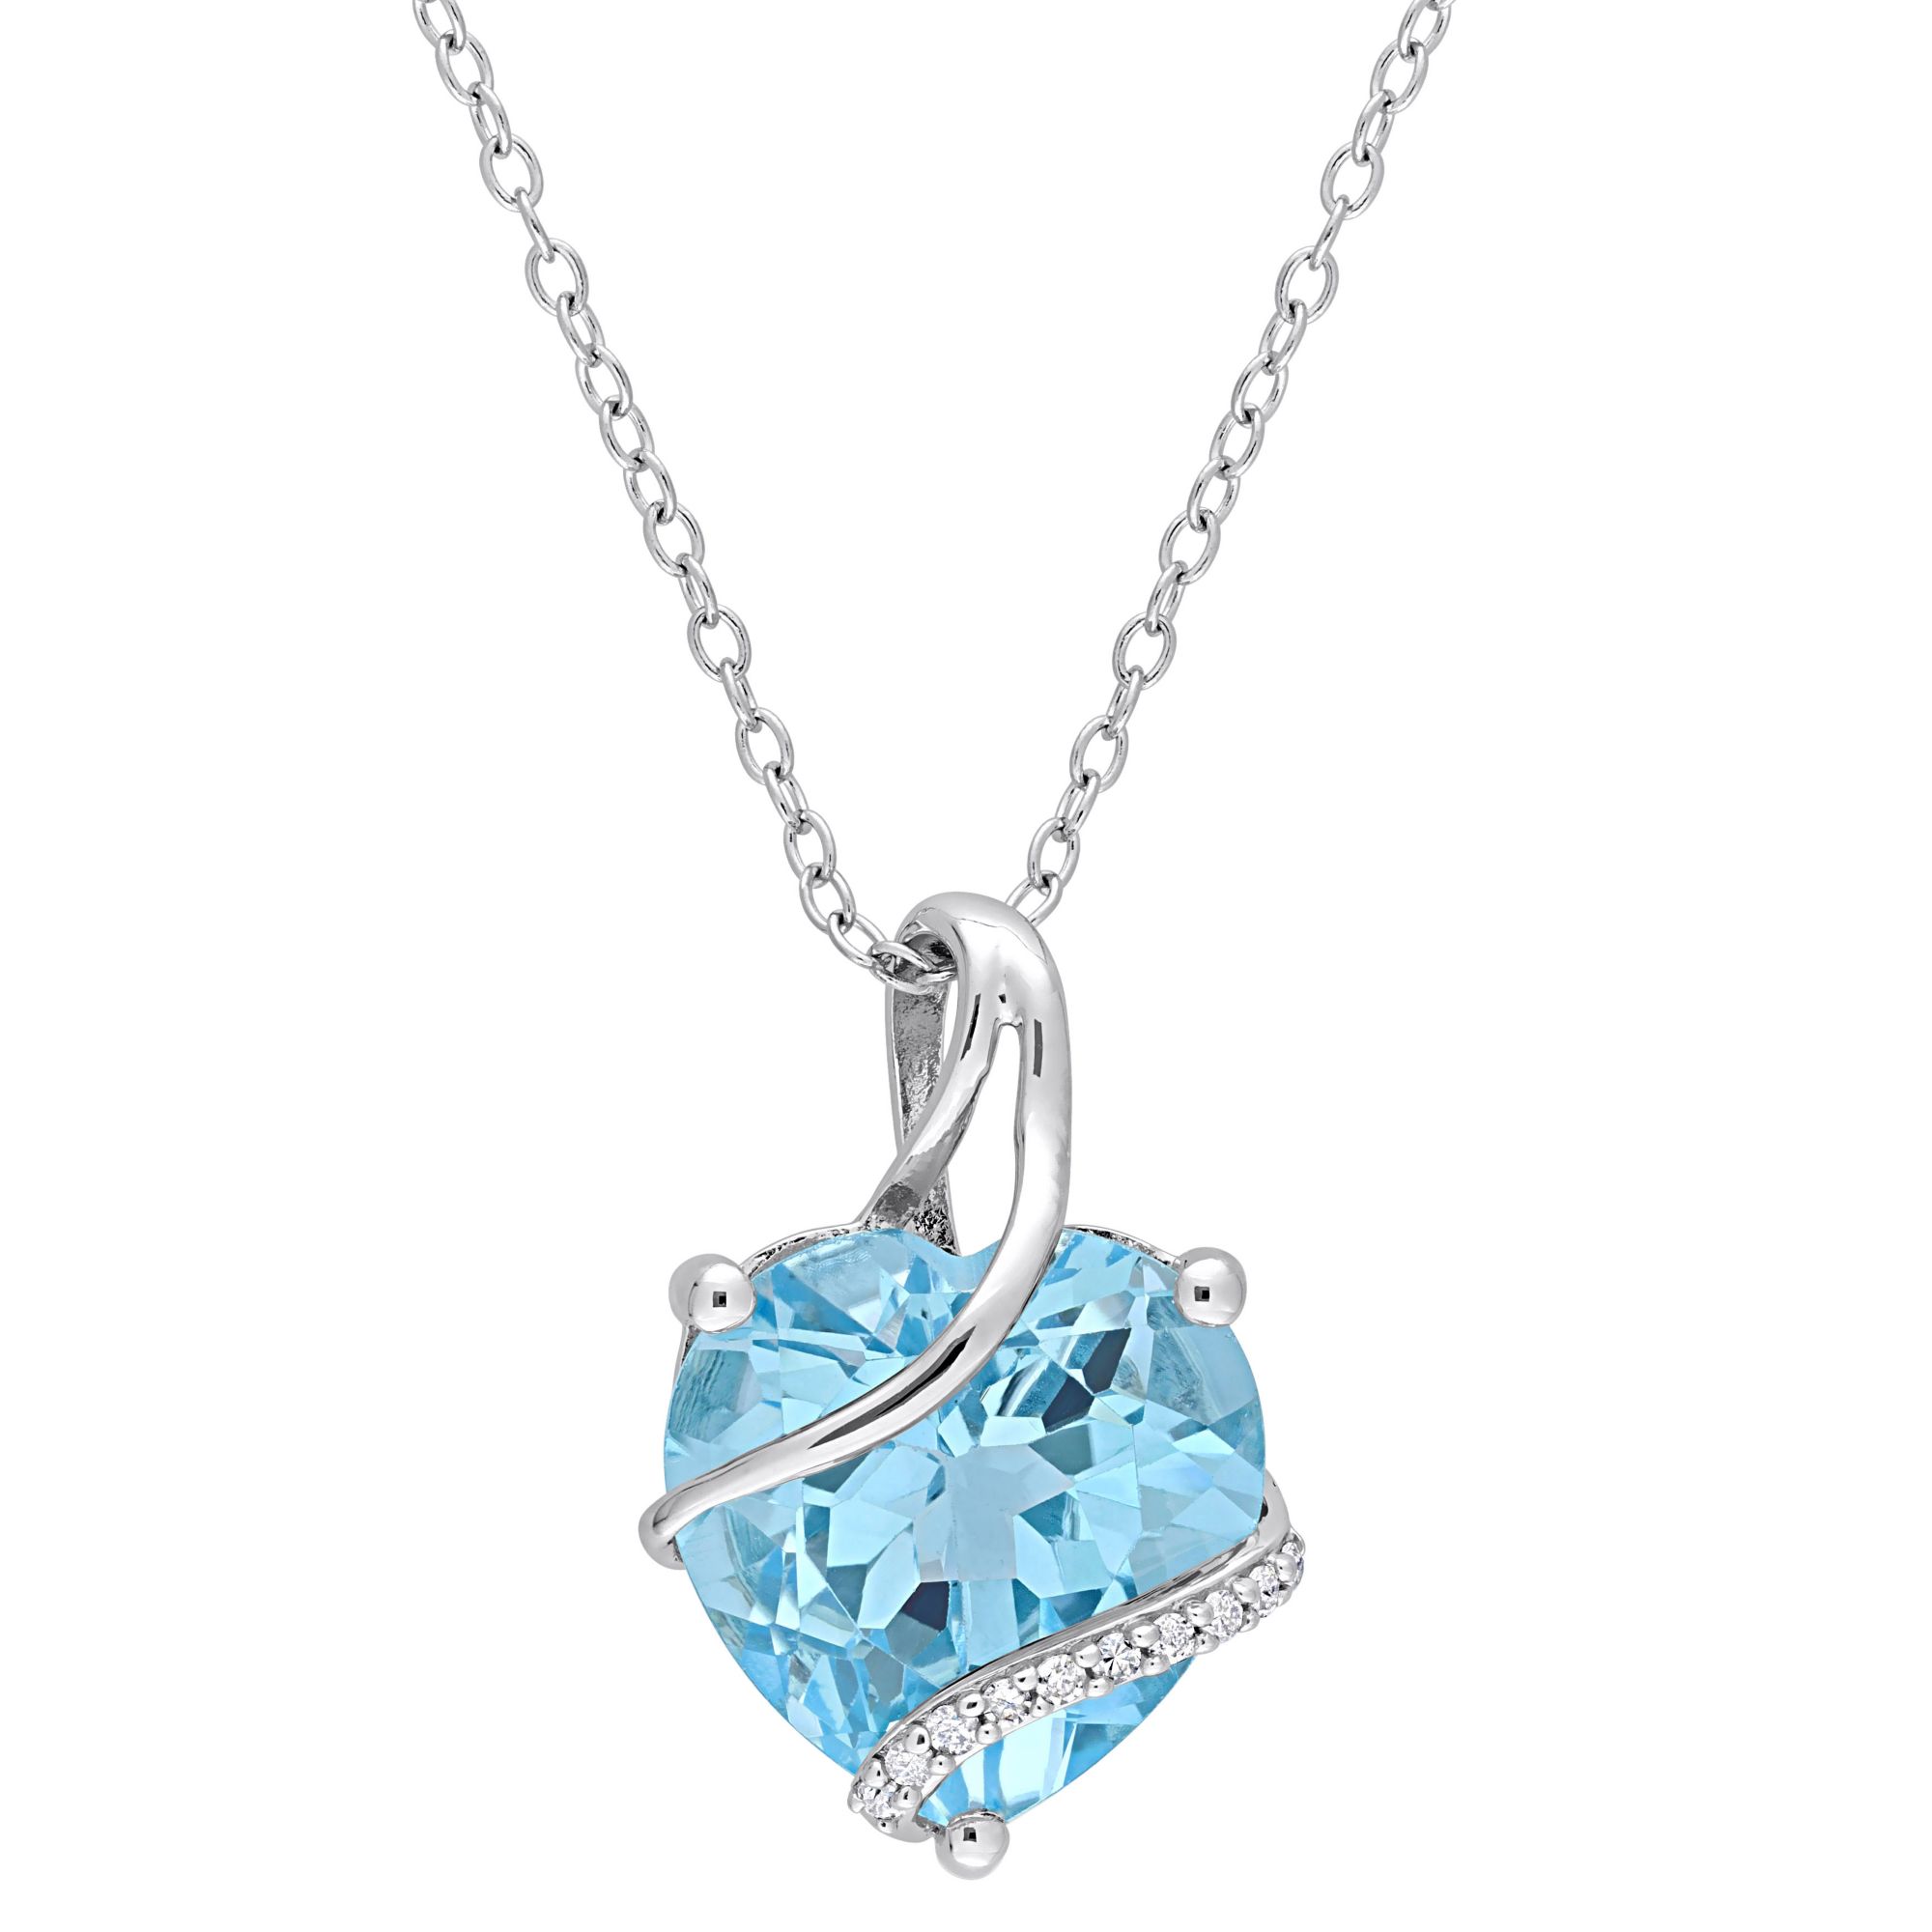 7 ct. t.g.w. Blue Topaz and Diamond Accent Heart Wrapped Necklace in Sterling Silver